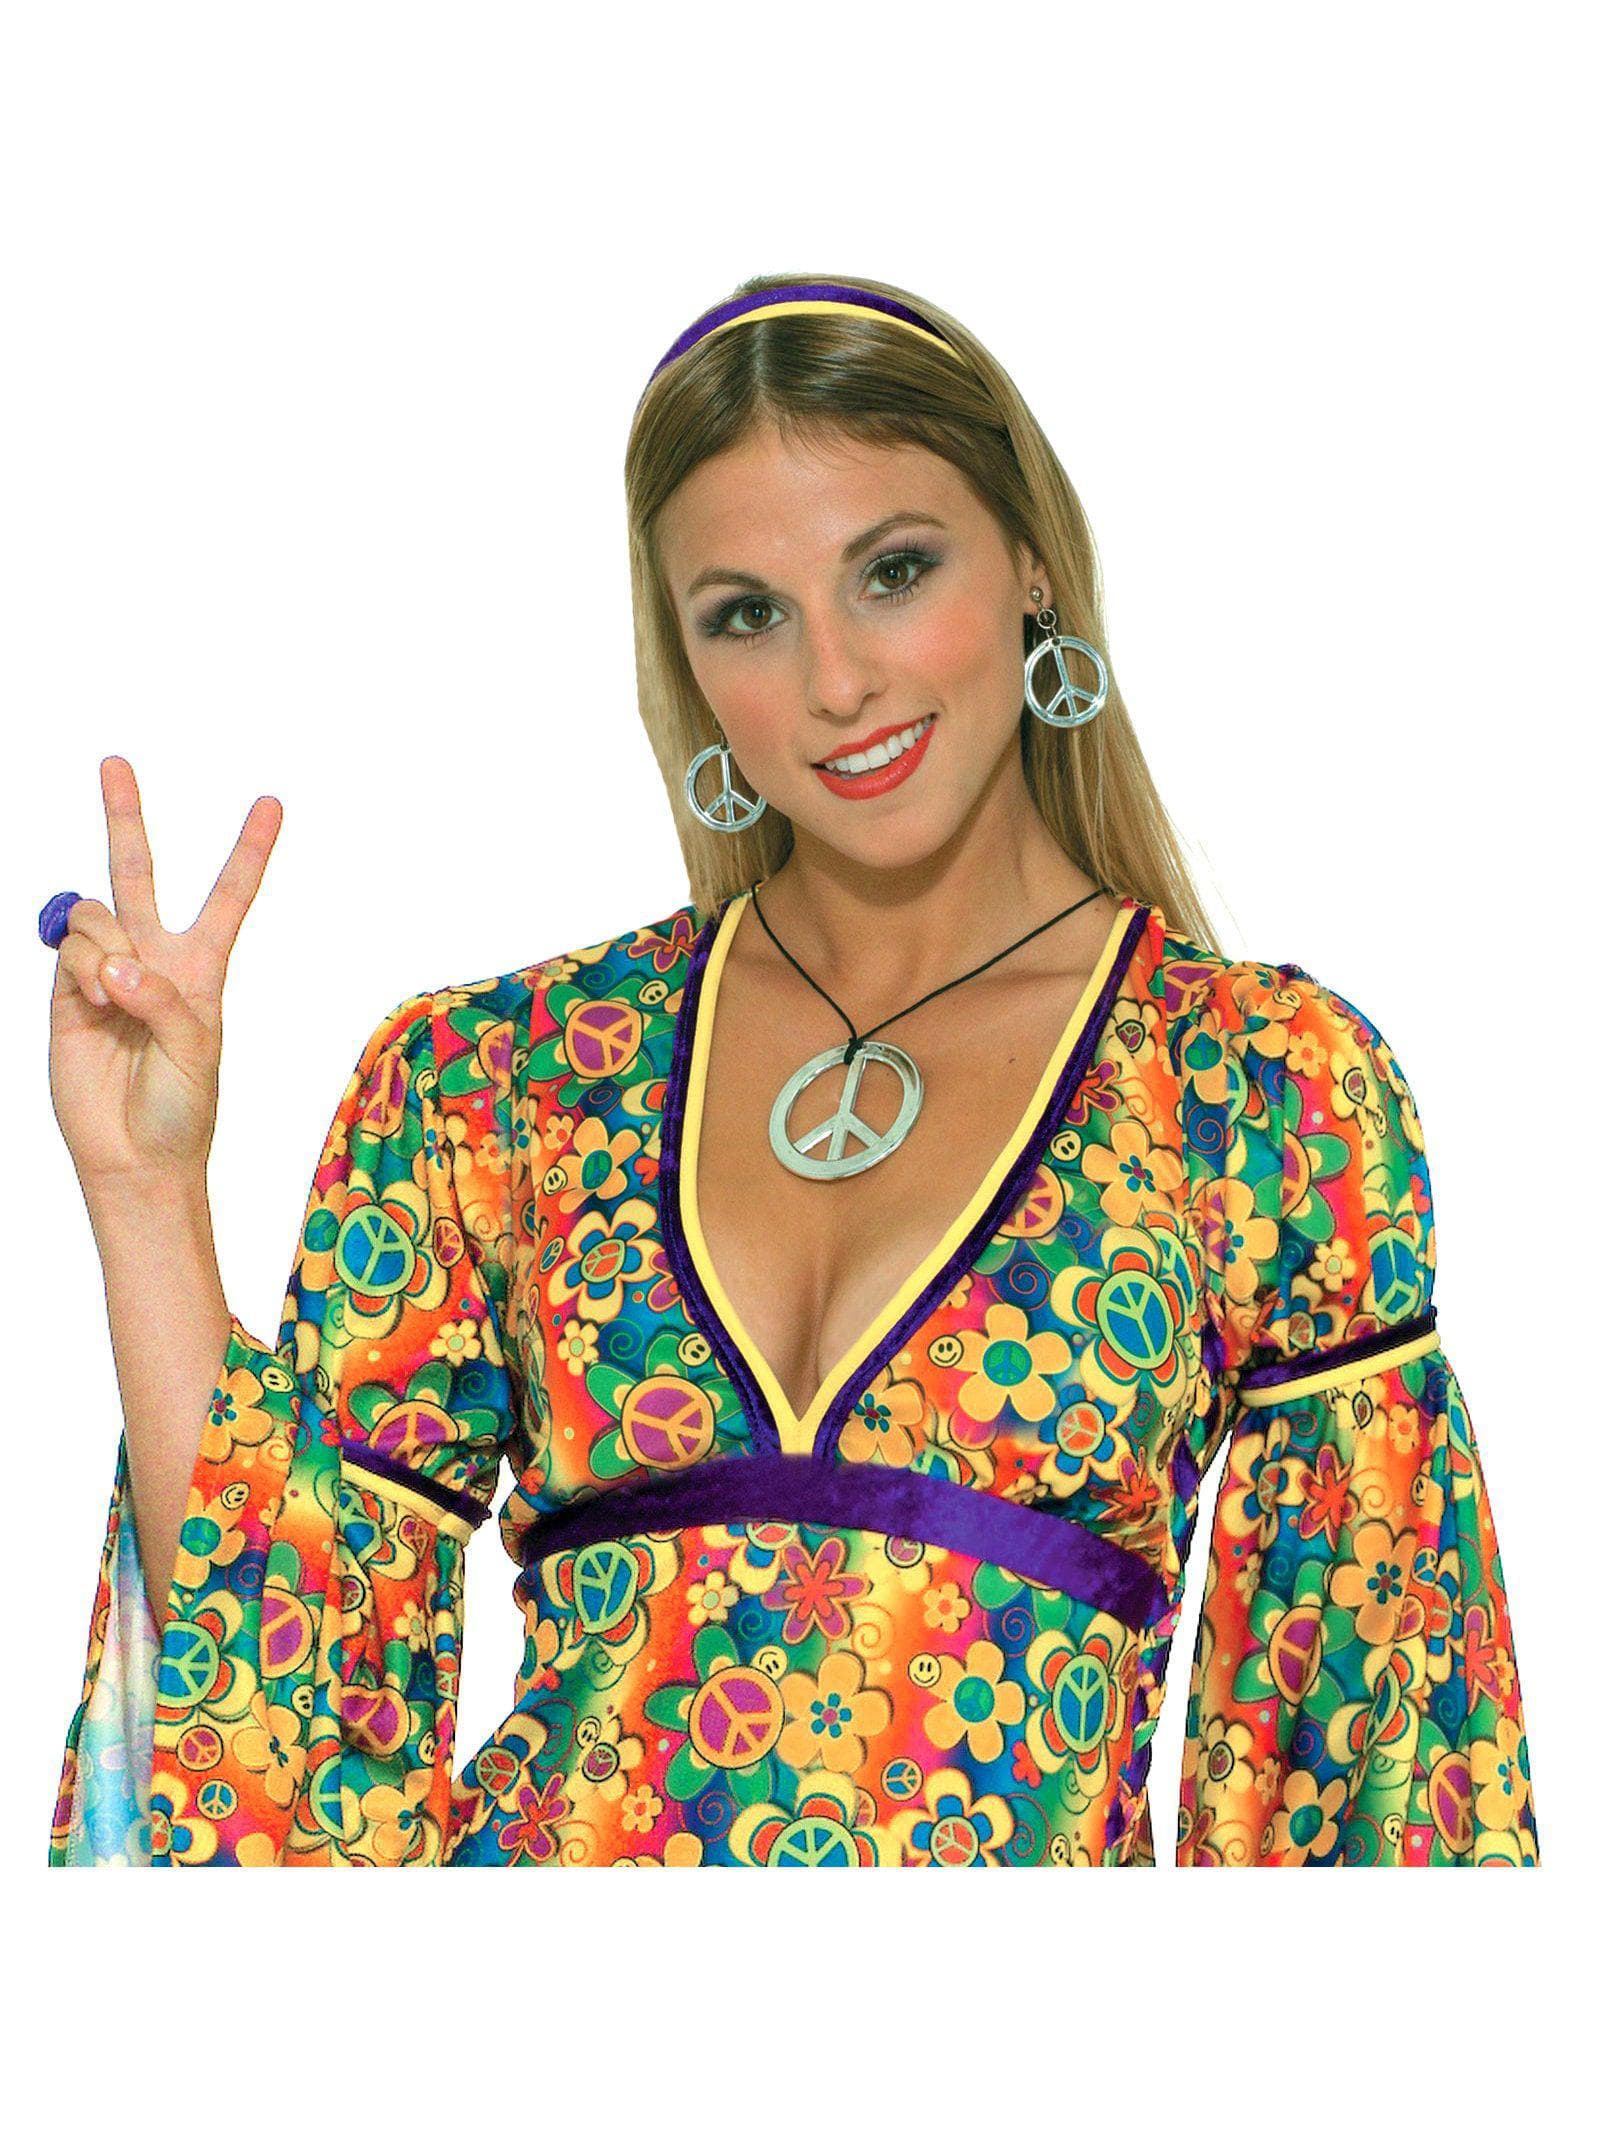 Women's Silver Hippie Peace Sign Necklace and Earrings - costumes.com